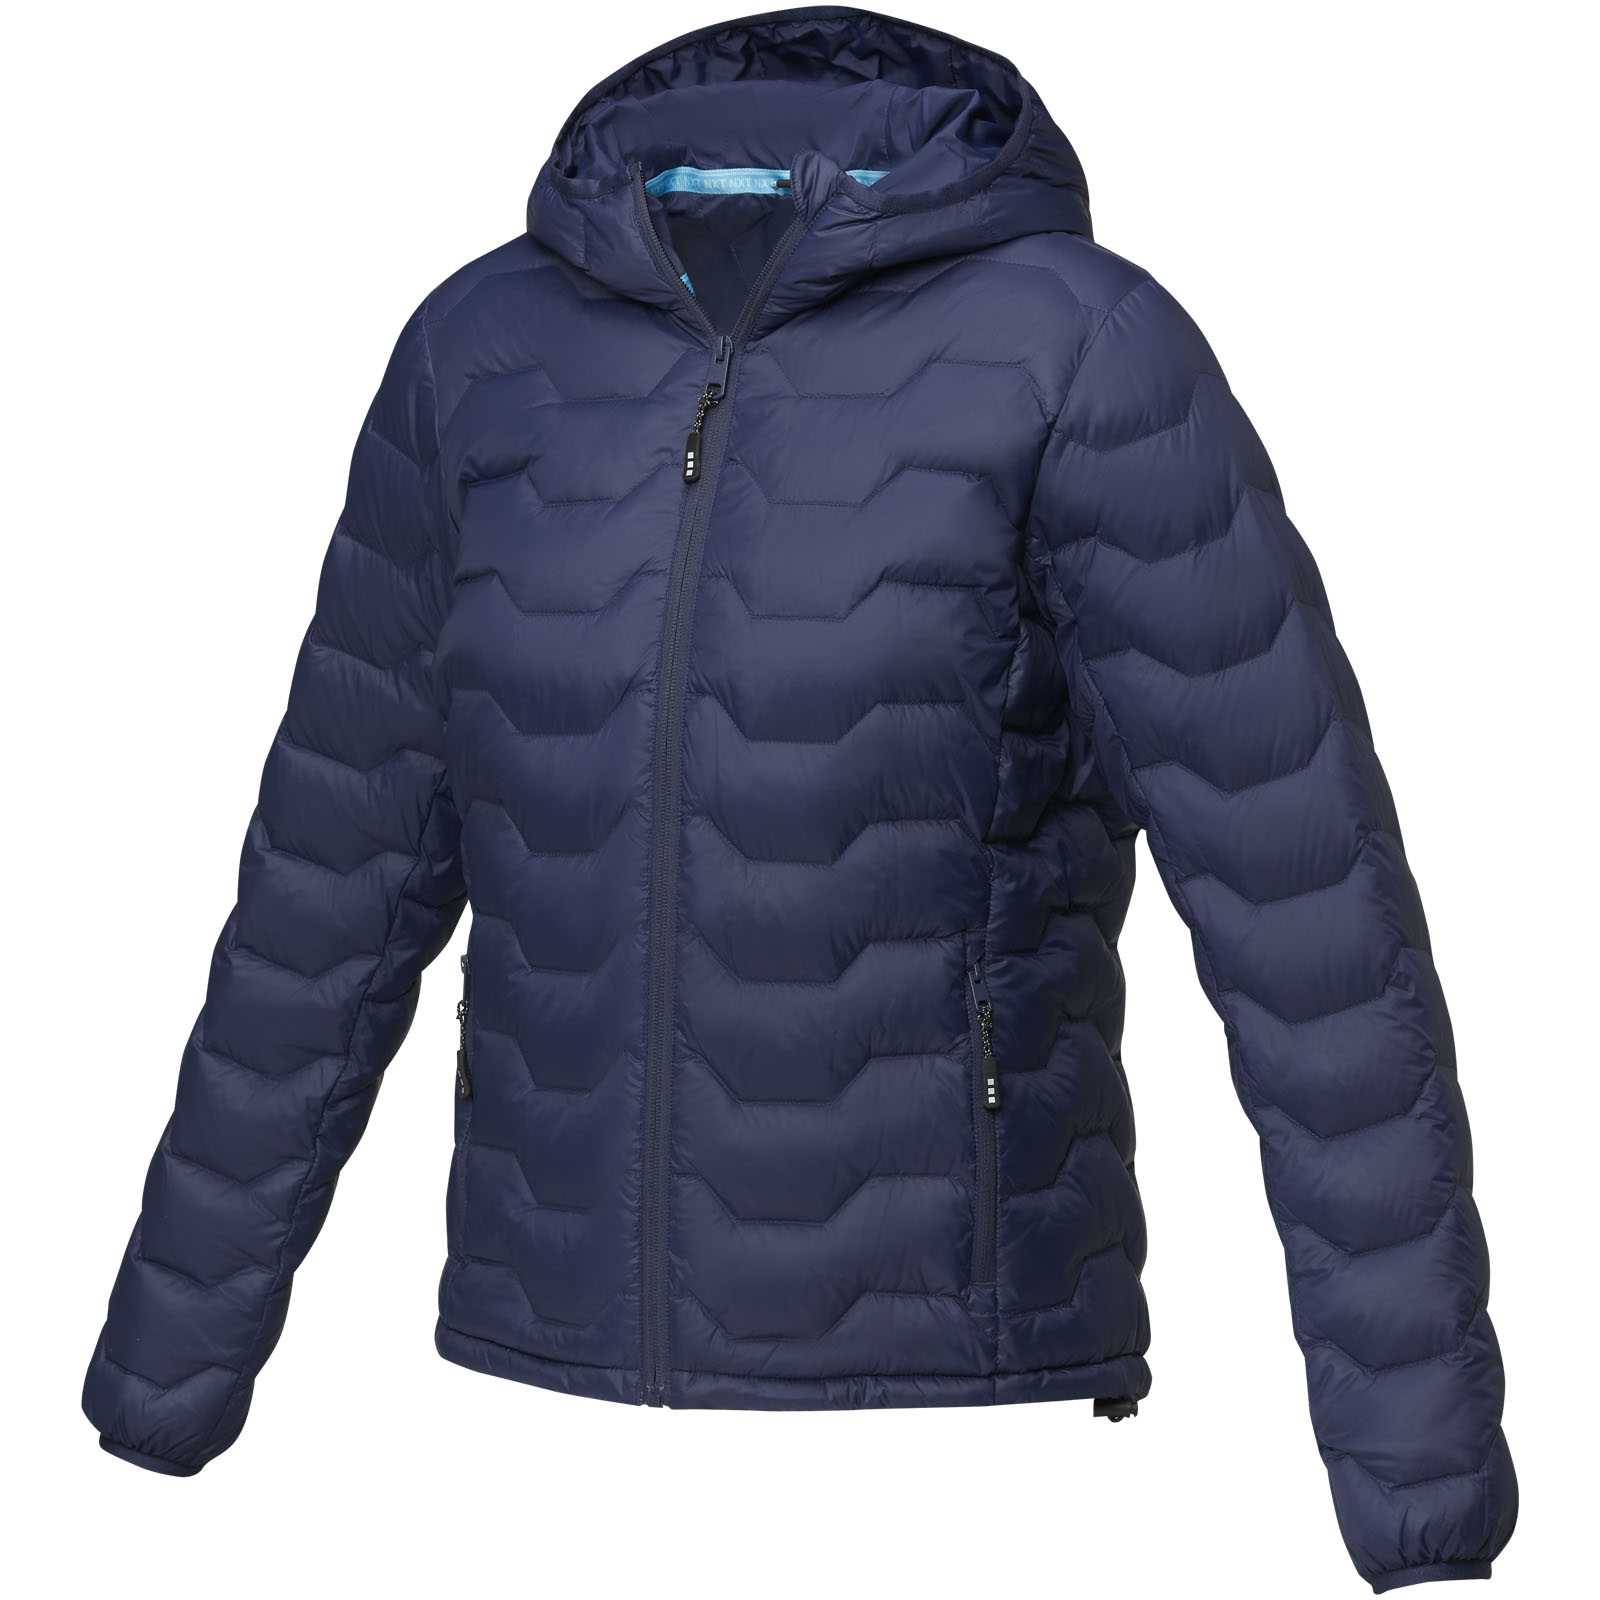 Advertising Jackets - Petalite women's GRS recycled insulated down jacket